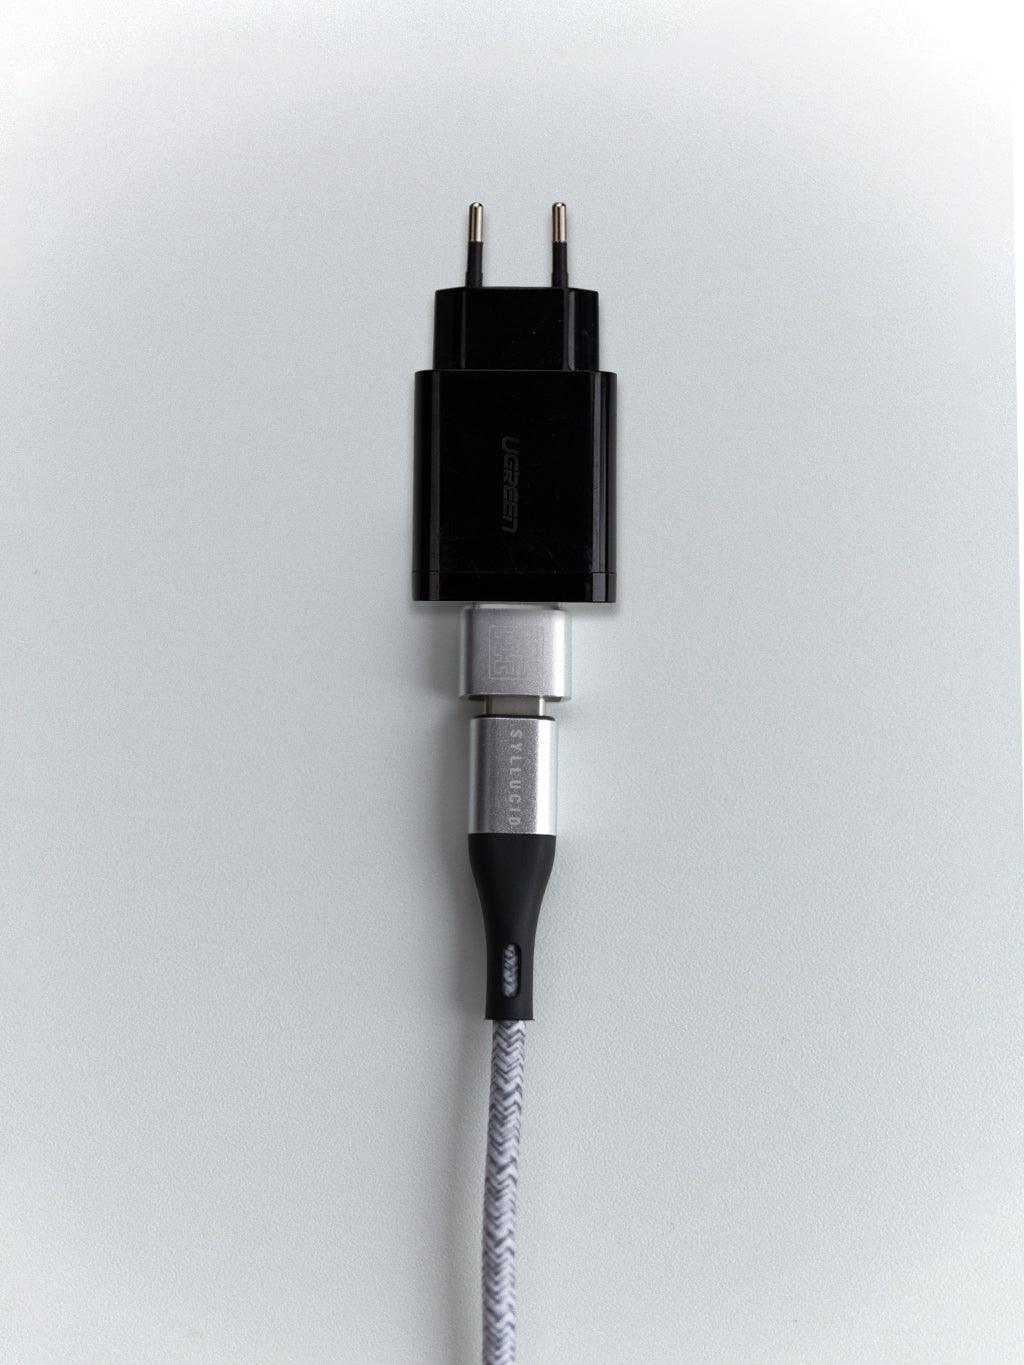 USB A to C adapter - Syllucid